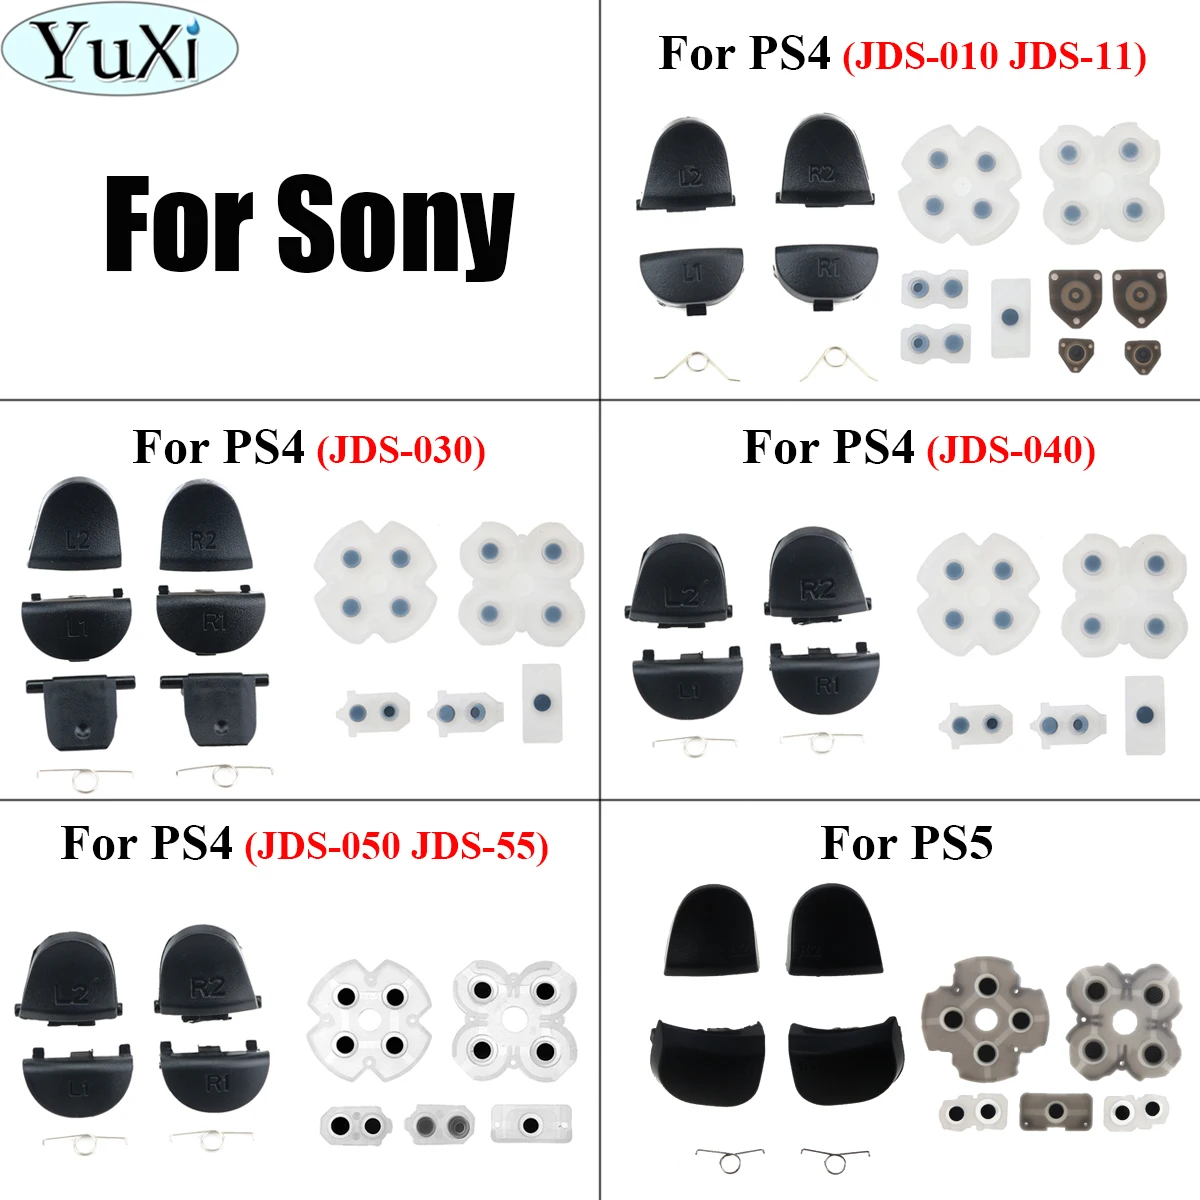 

YuXi Handle Repair Parts Conductive Rubber Pad + L1 R1 L2 R2 Trigger Buttons +Spring For PS5 PS4 JDS JDM-010 011 030 040 050 055